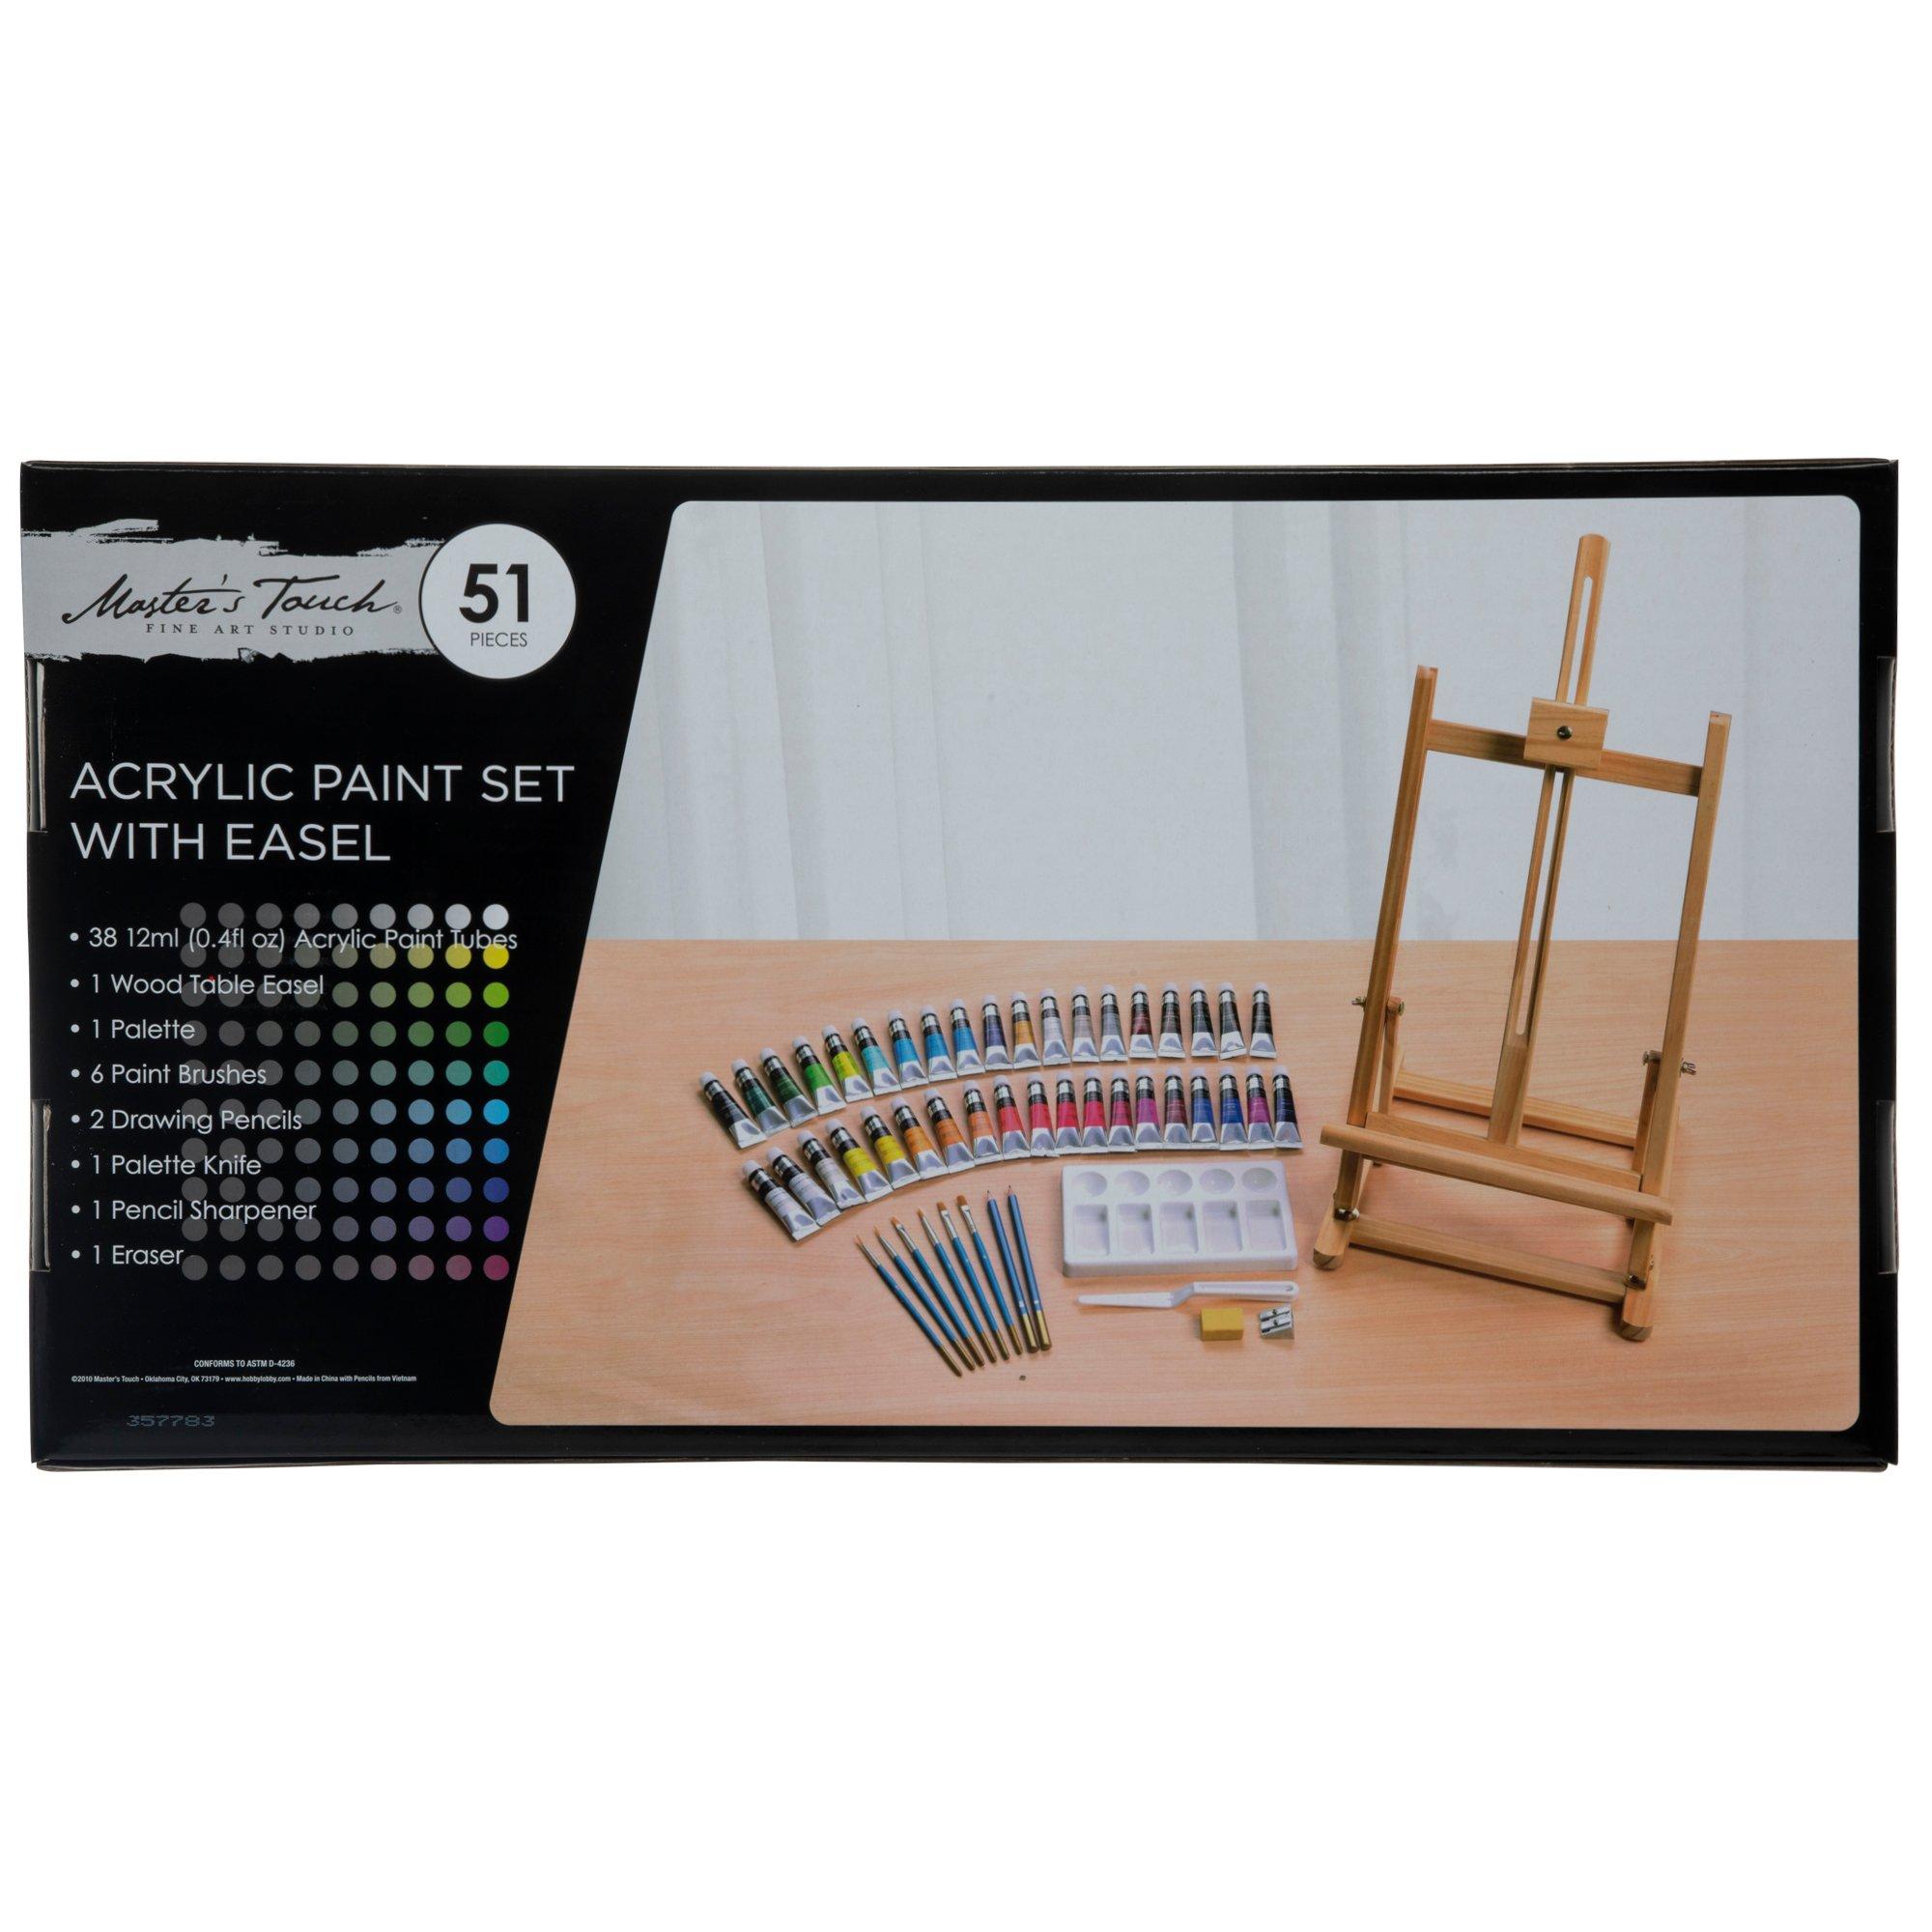 Pennelli MINI EASEL & BOARD SET Art Supplies Painting Drawing